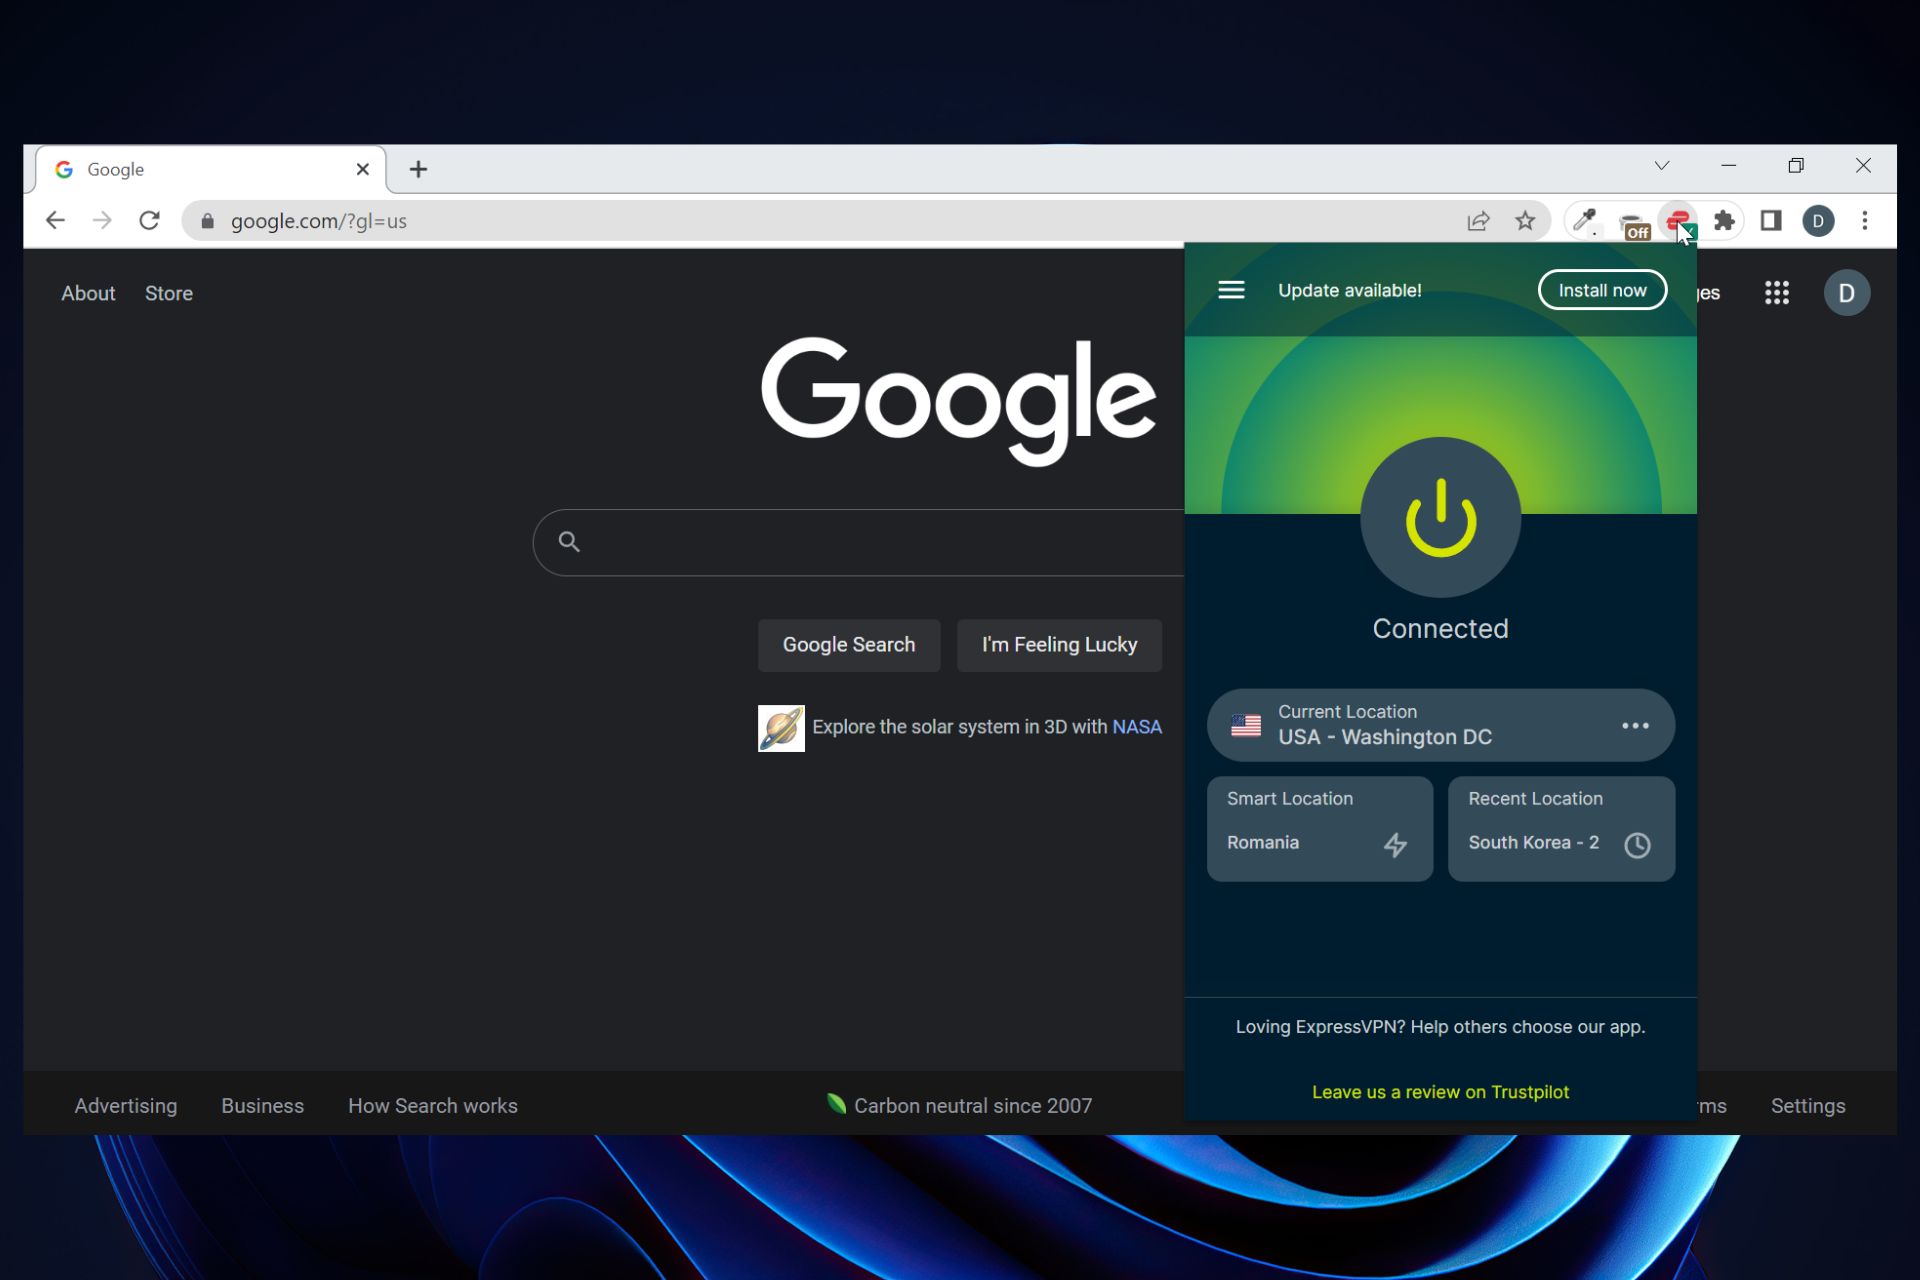 cyberghost vpn extension for chrome